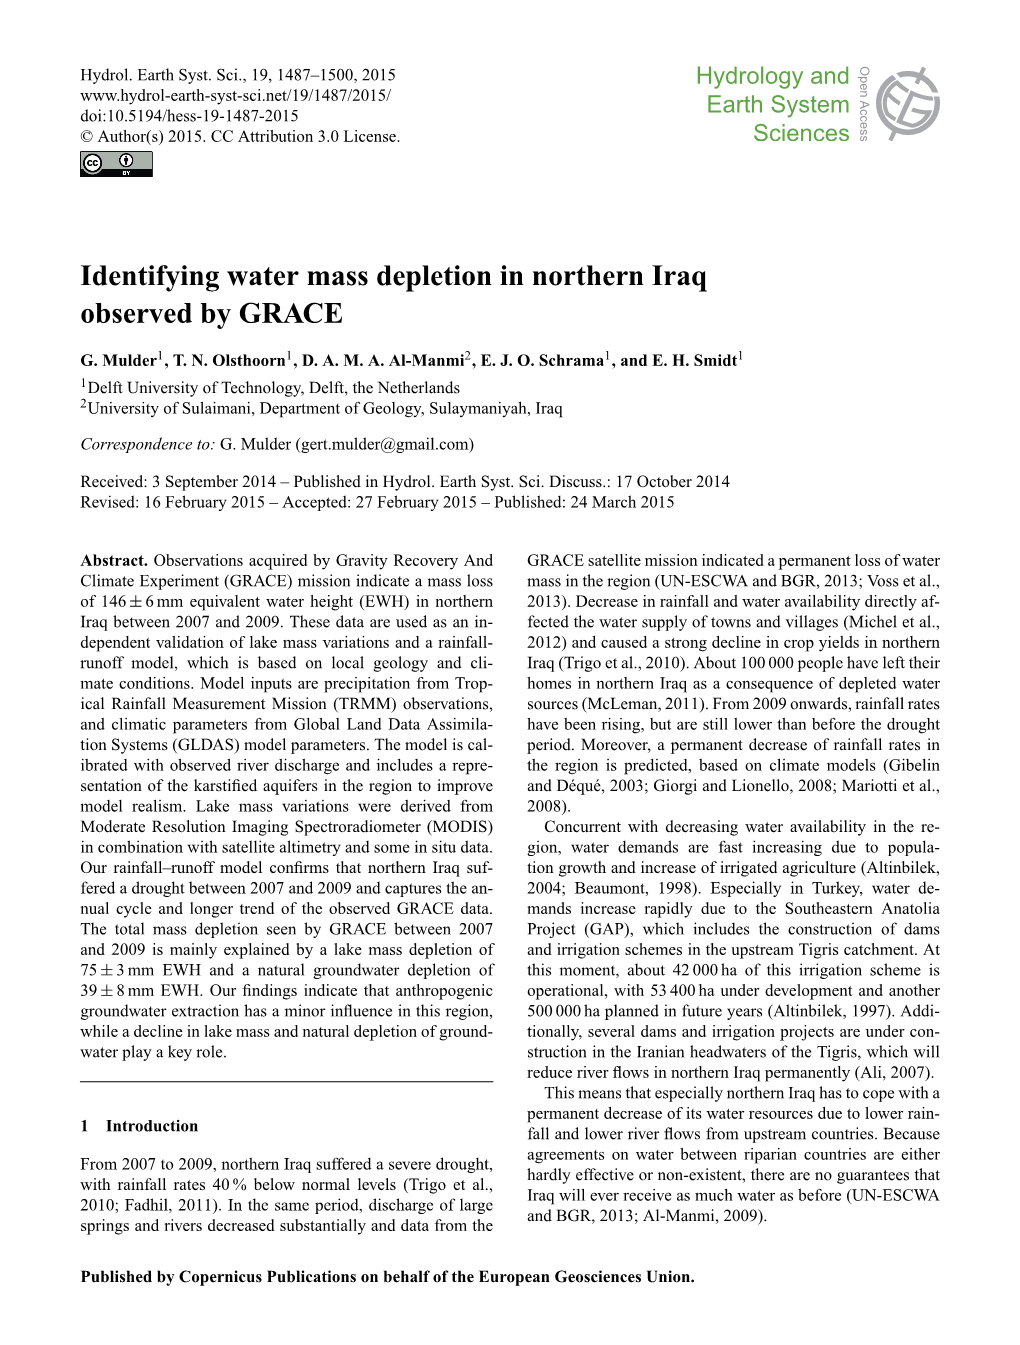 Identifying Water Mass Depletion in Northern Iraq Observed by GRACE